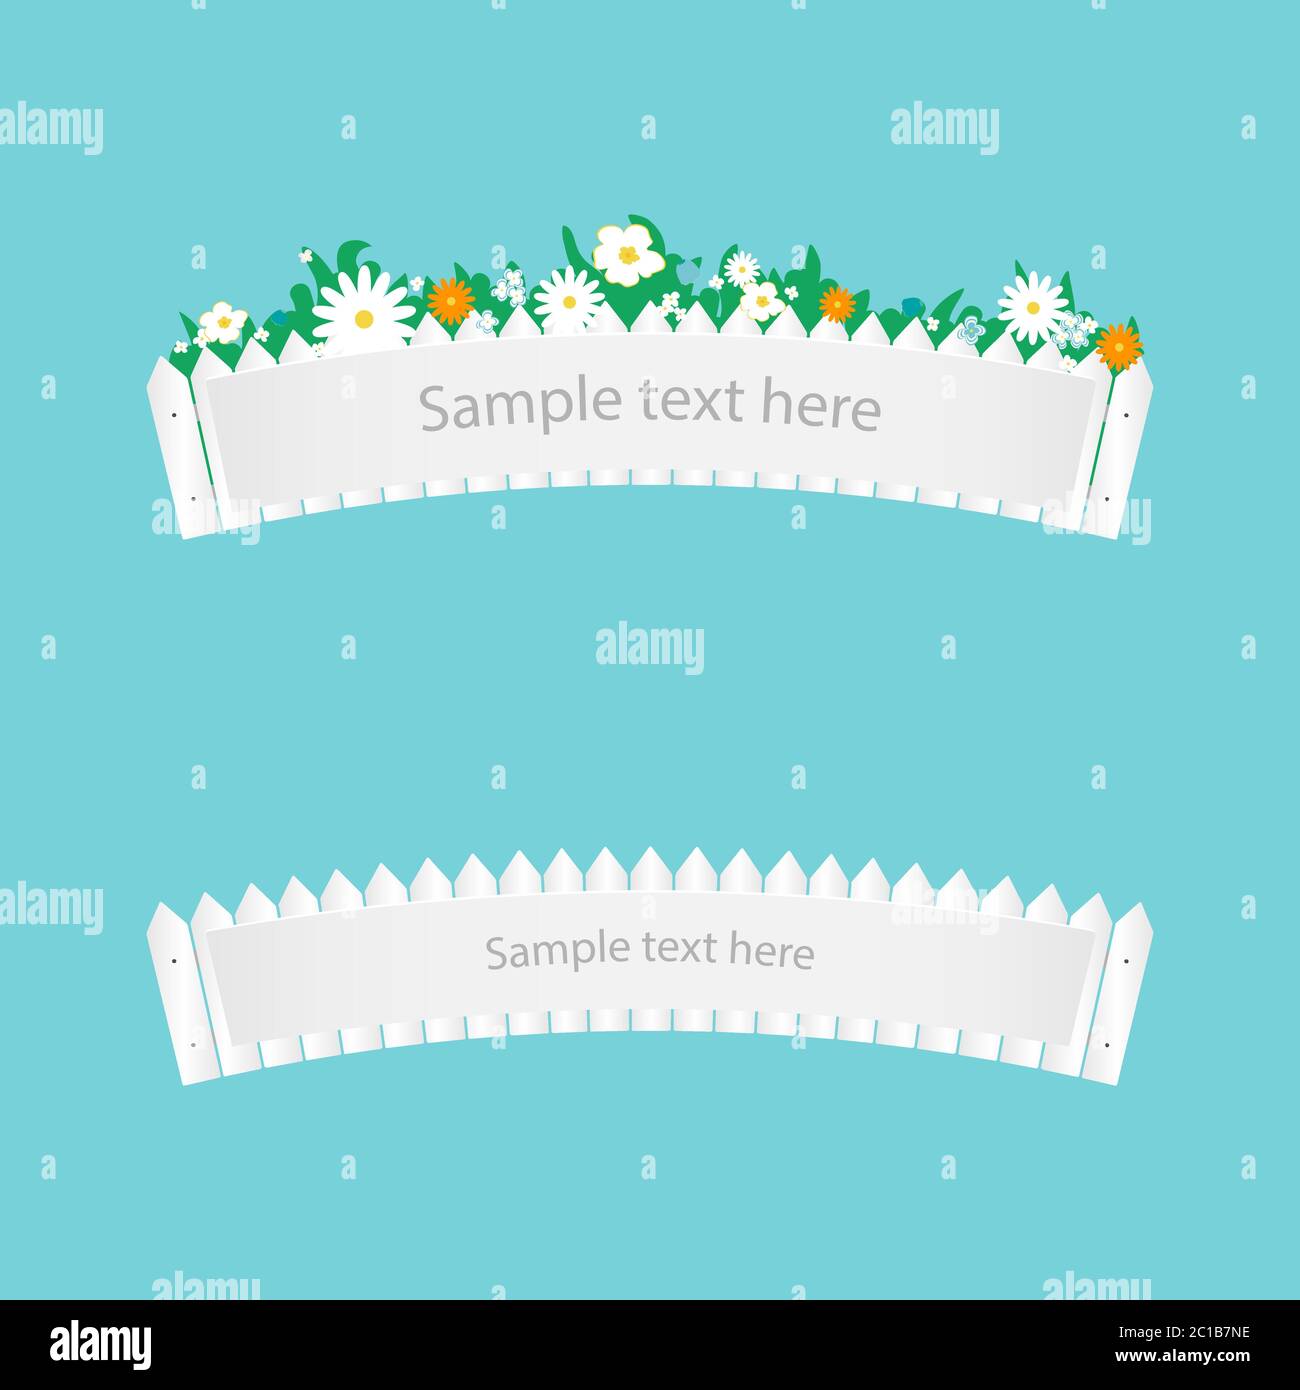 Fence with flowers | Banner Stock Vector